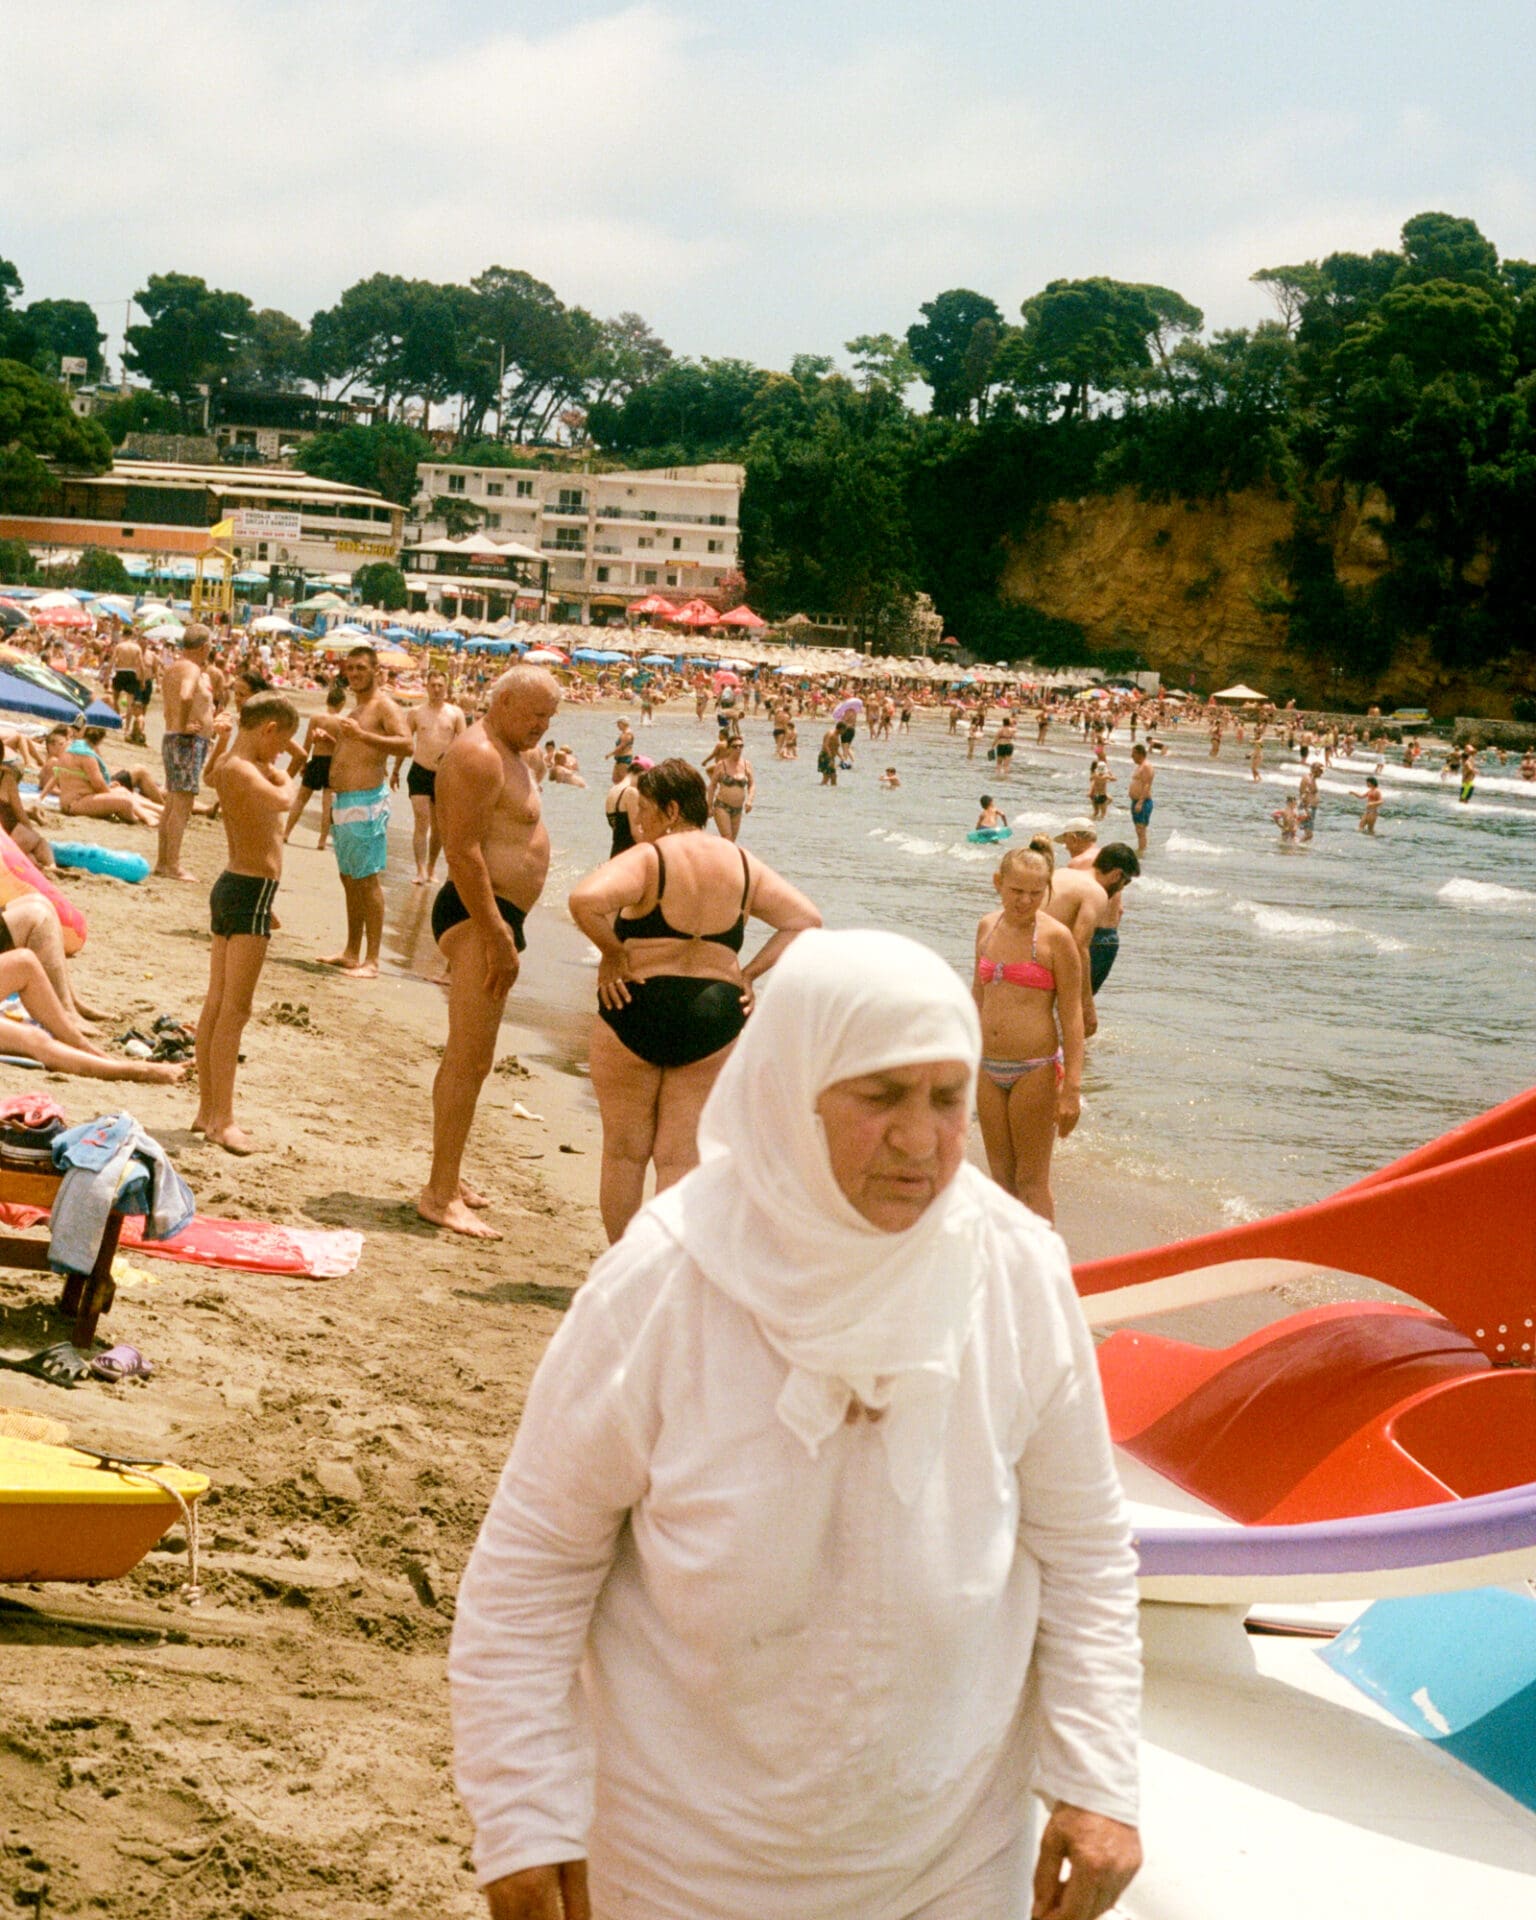 Hazel Gaskin photographs Albania | a woman in a white headscarf and robe on the beach, with other beachgoers behind her